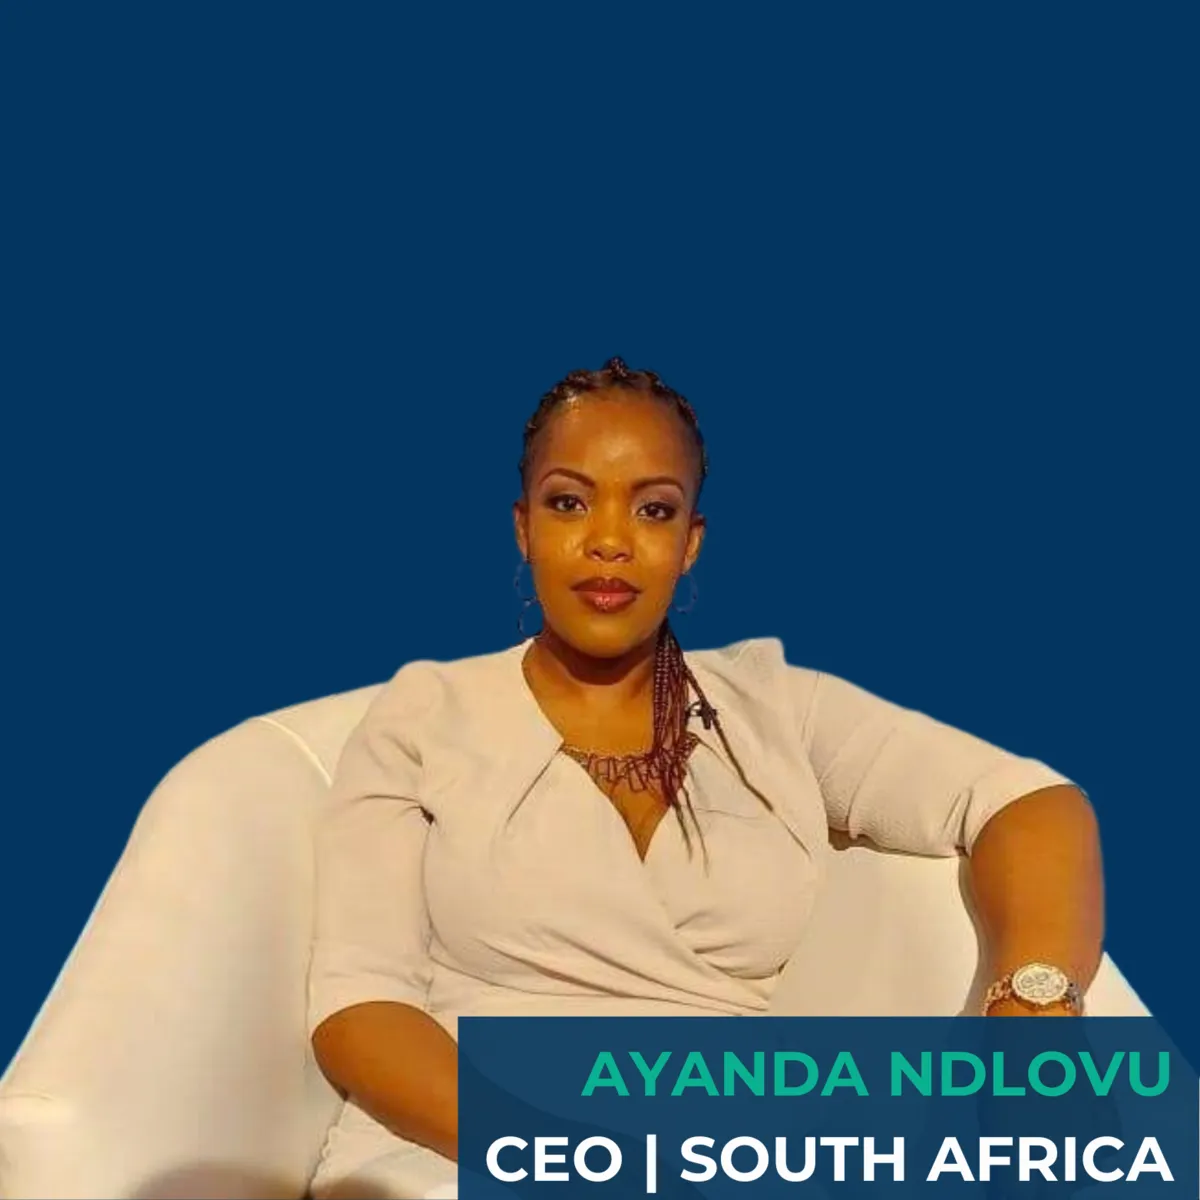 APPOINTMENT OF AYANDA NDLOVU AS COFACE CEO FOR SOUTH AFRICA